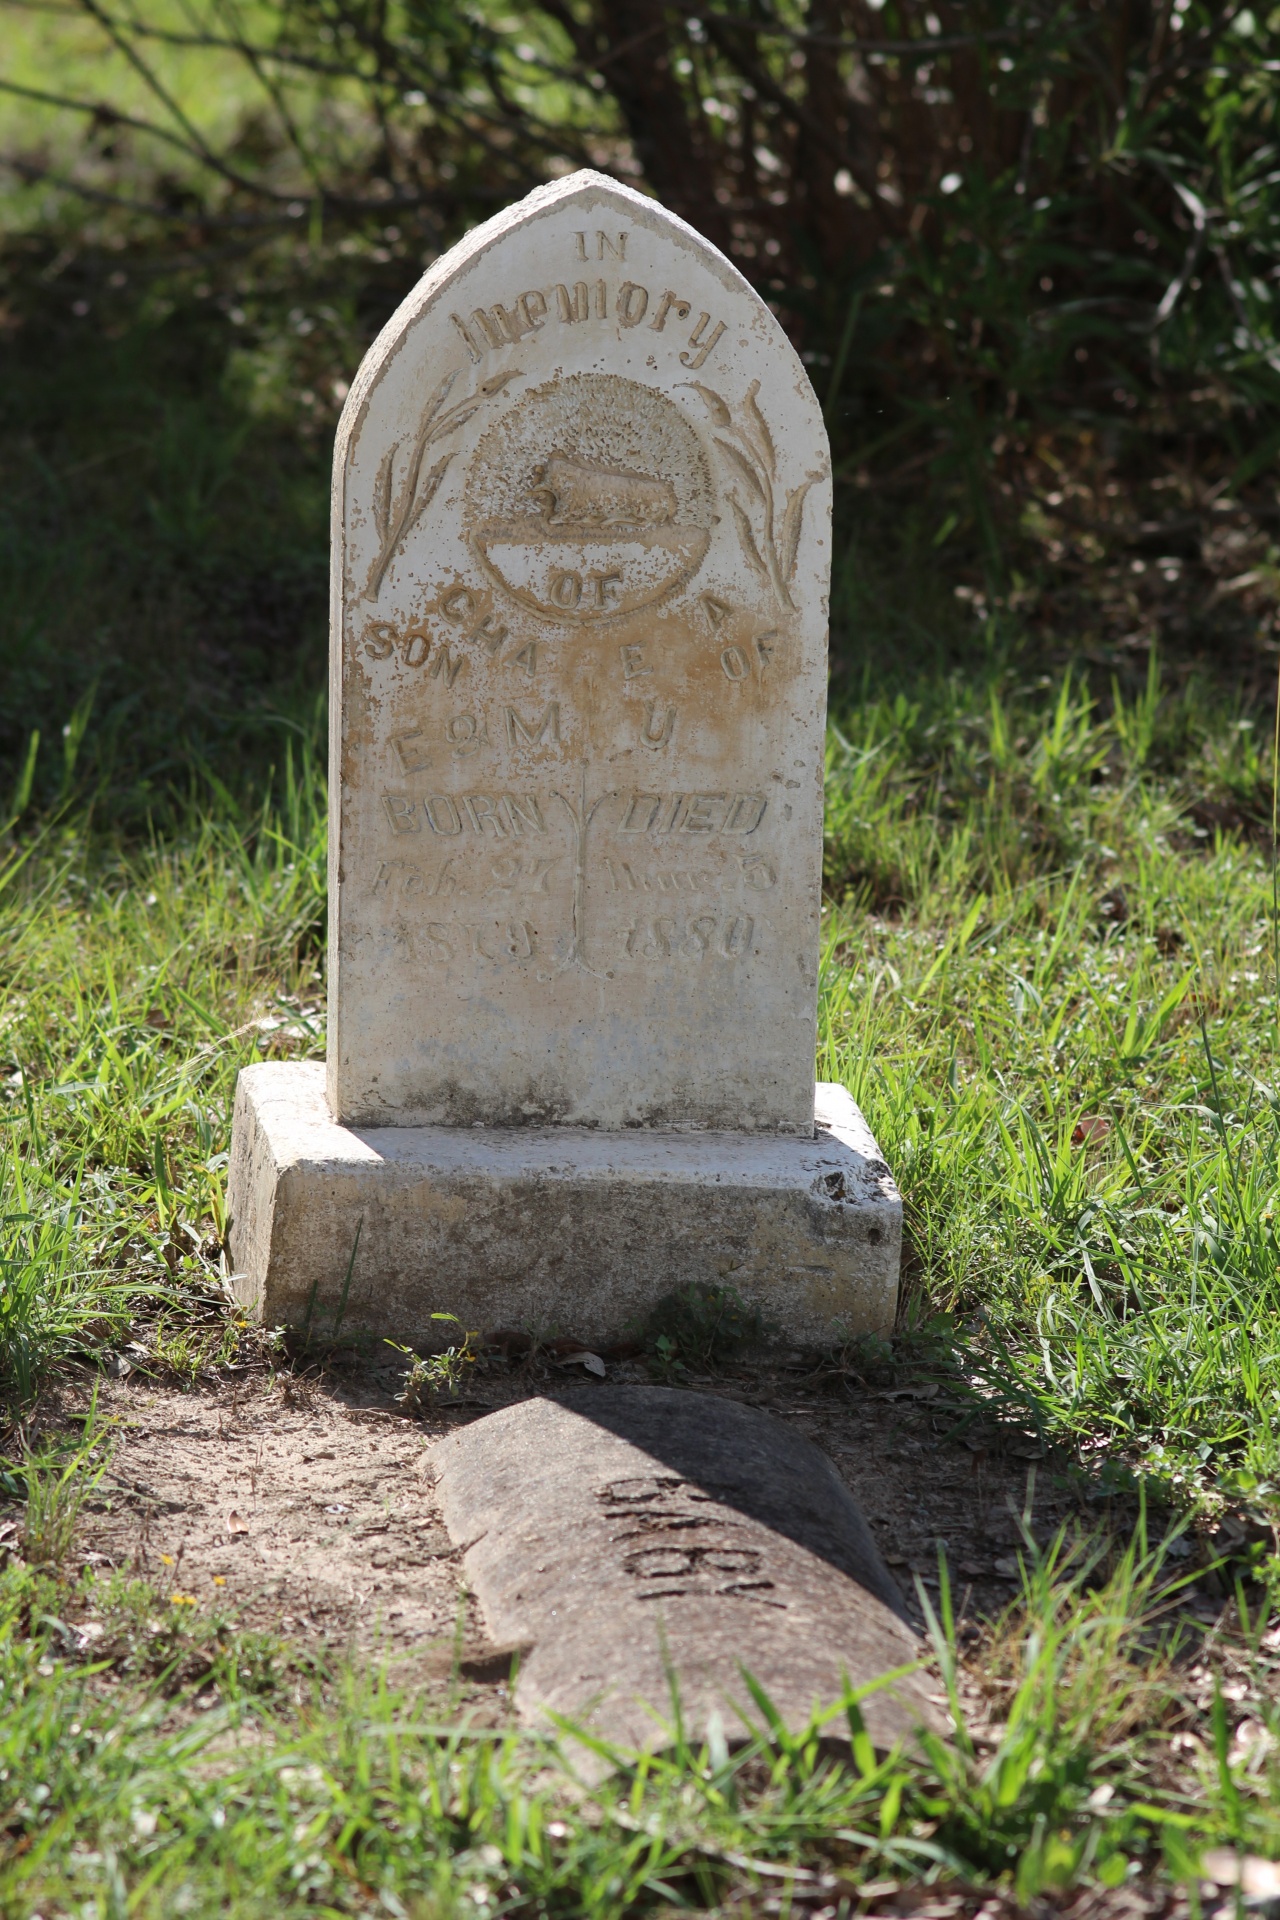 A child's grave from the 1800s